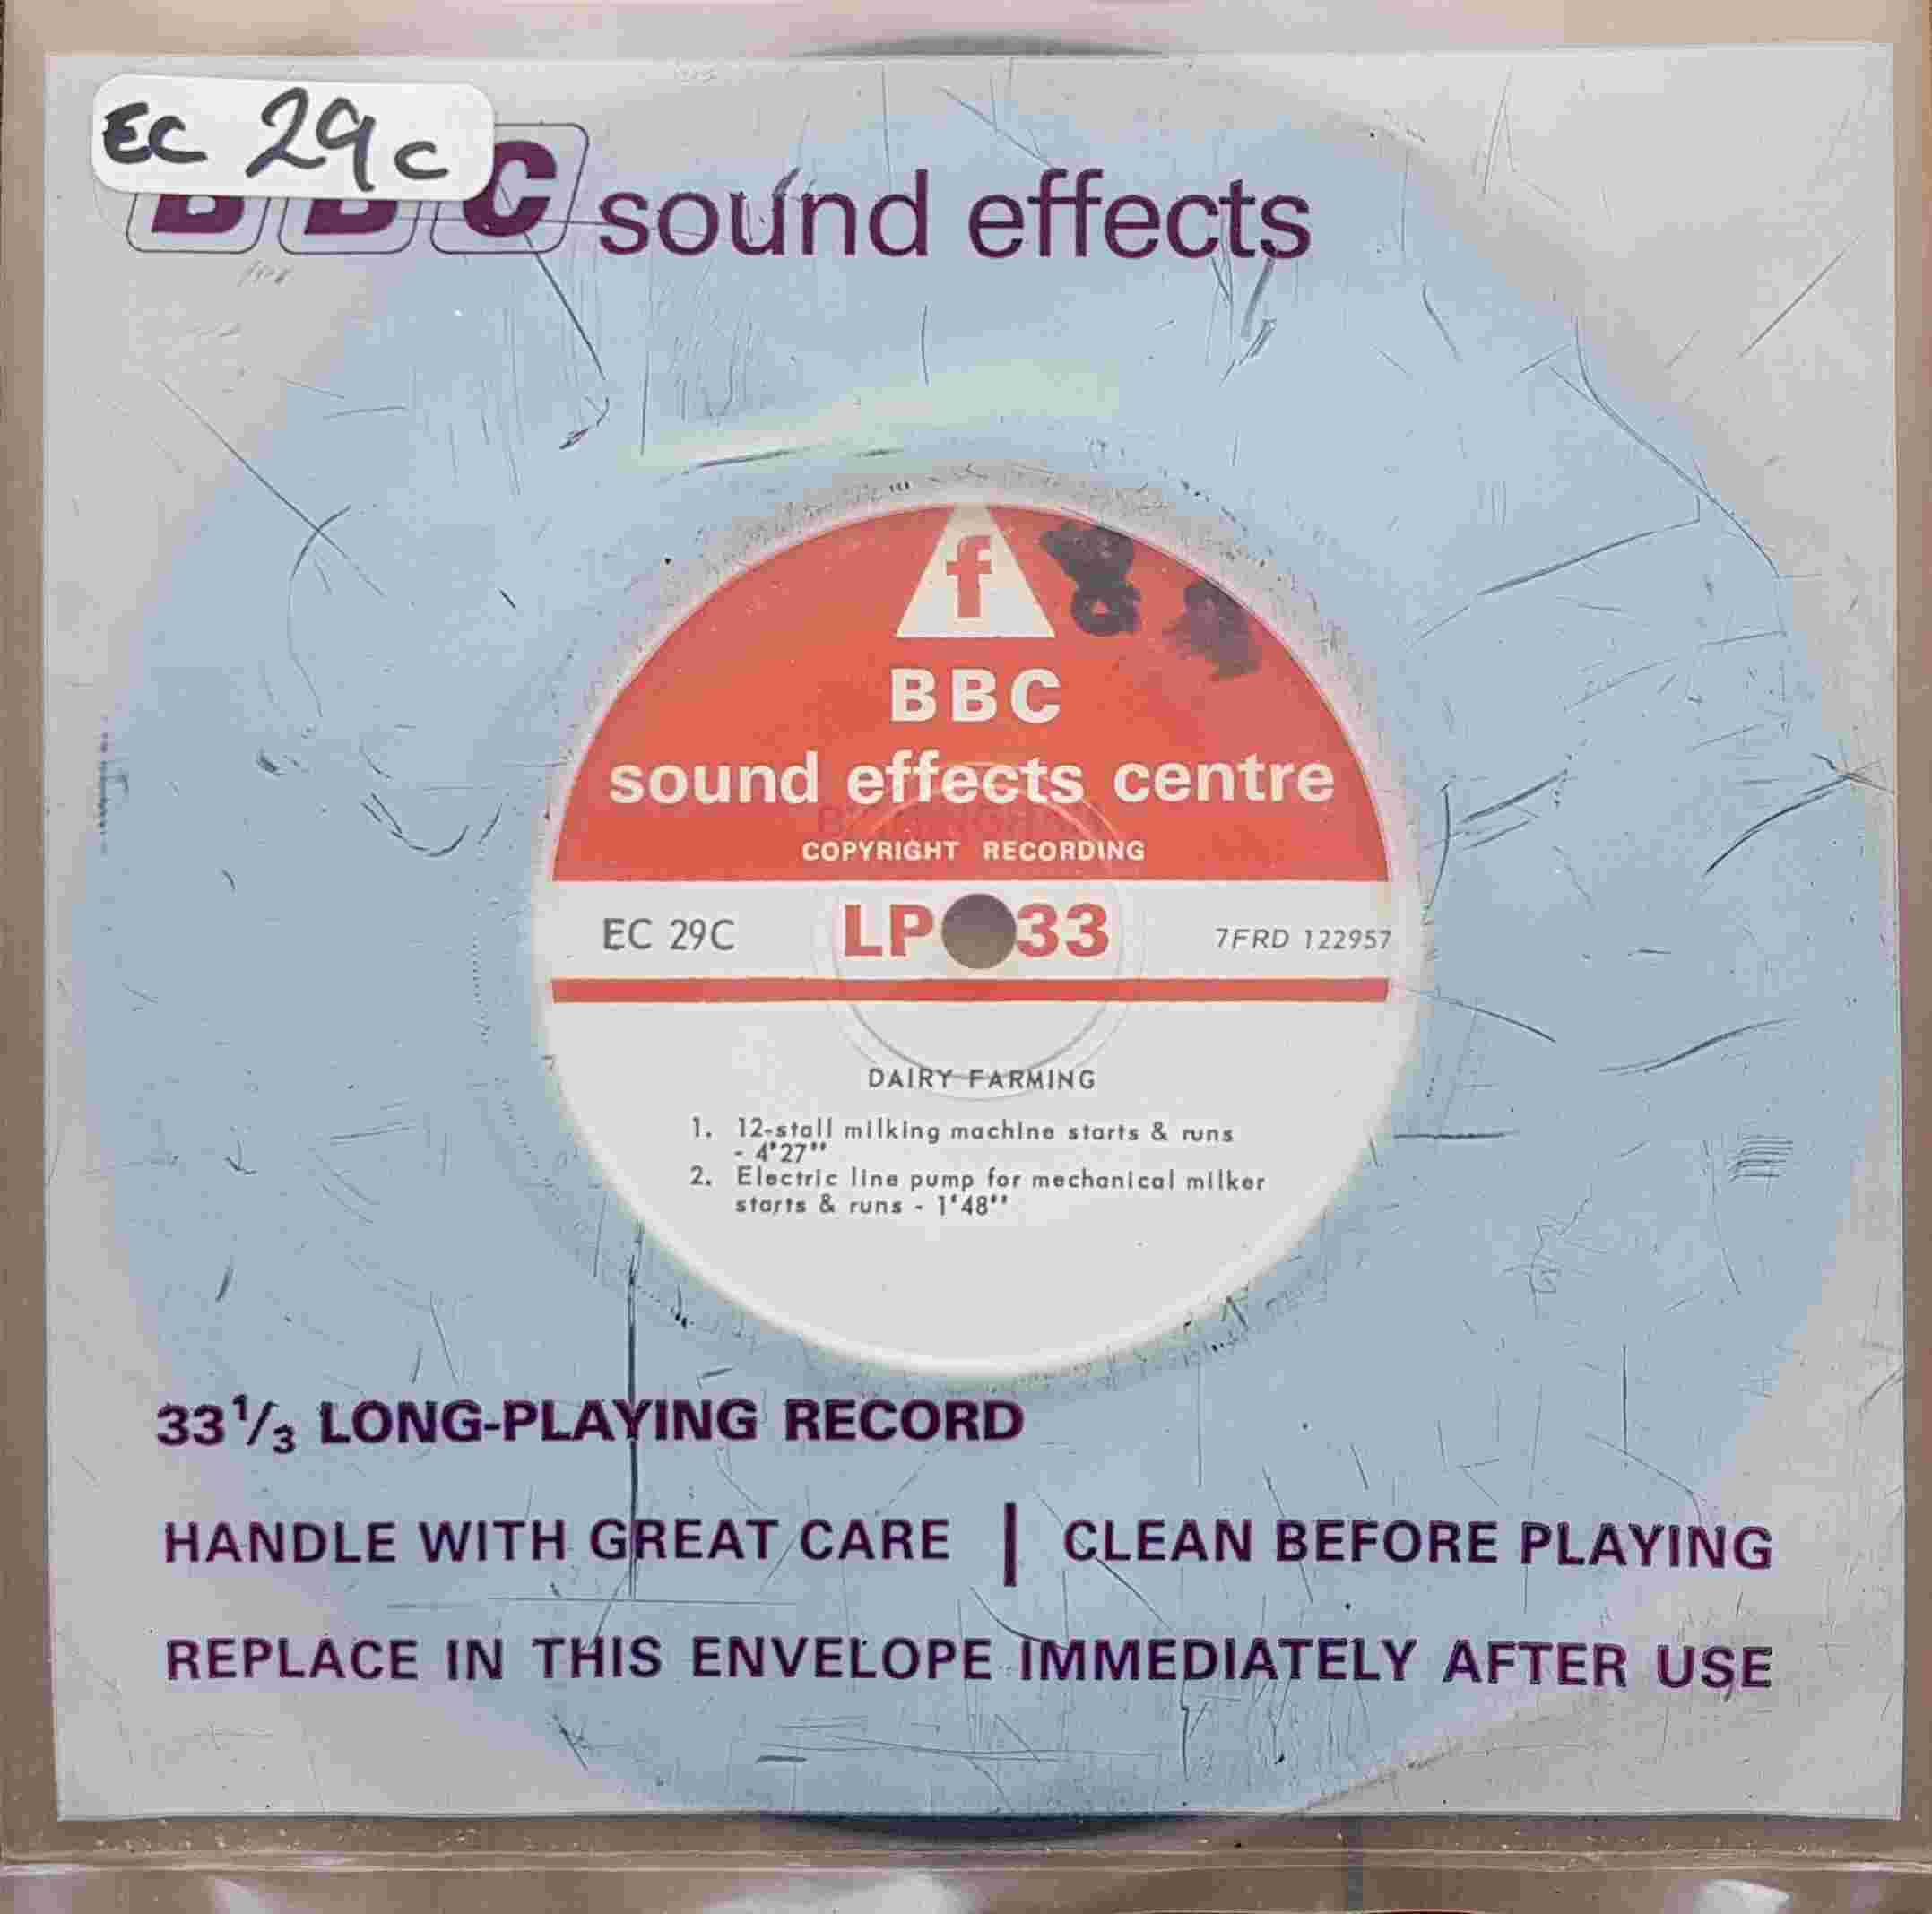 Picture of EC 29C Dairy farming by artist Not registered from the BBC singles - Records and Tapes library